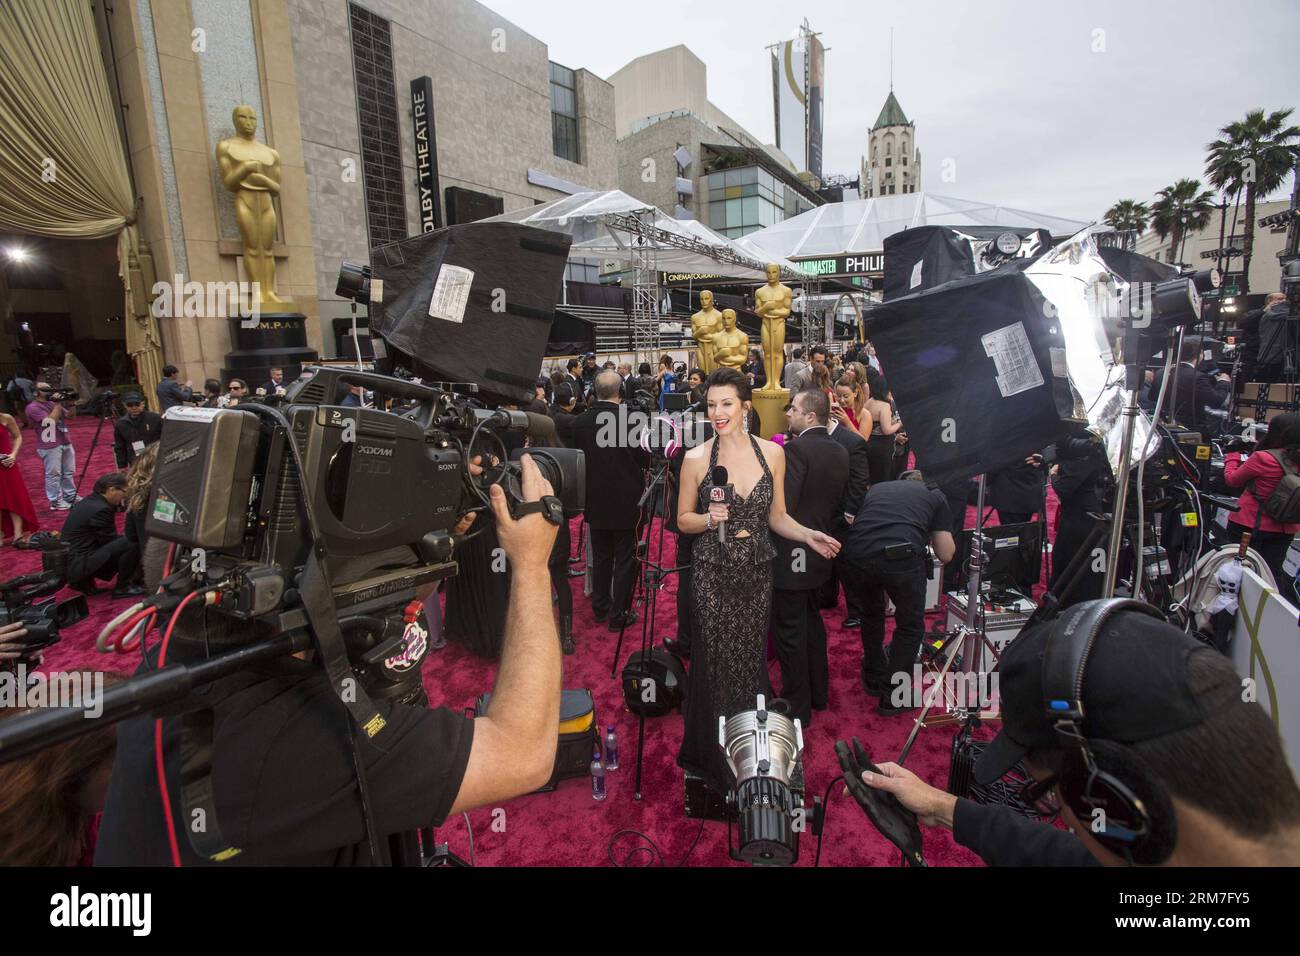 Journalists take positions in the red carpet arrival area outside the Dolby Theatre Dolby Theater before the 86th Academy Awards in Los Angeles, March 2, 2014. (Xinhua/Zhao Hanrong) US-LOS ANGELES-OSCARS PUBLICATIONxNOTxINxCHN   Journalists Take POSITIONS in The Red Carpet Arrival Area outside The Dolby Theatre Dolby Theatre Before The 86th Academy Awards in Los Angeles March 2 2014 XINHUA Zhao  U.S. Los Angeles Oscars PUBLICATIONxNOTxINxCHN Stock Photo